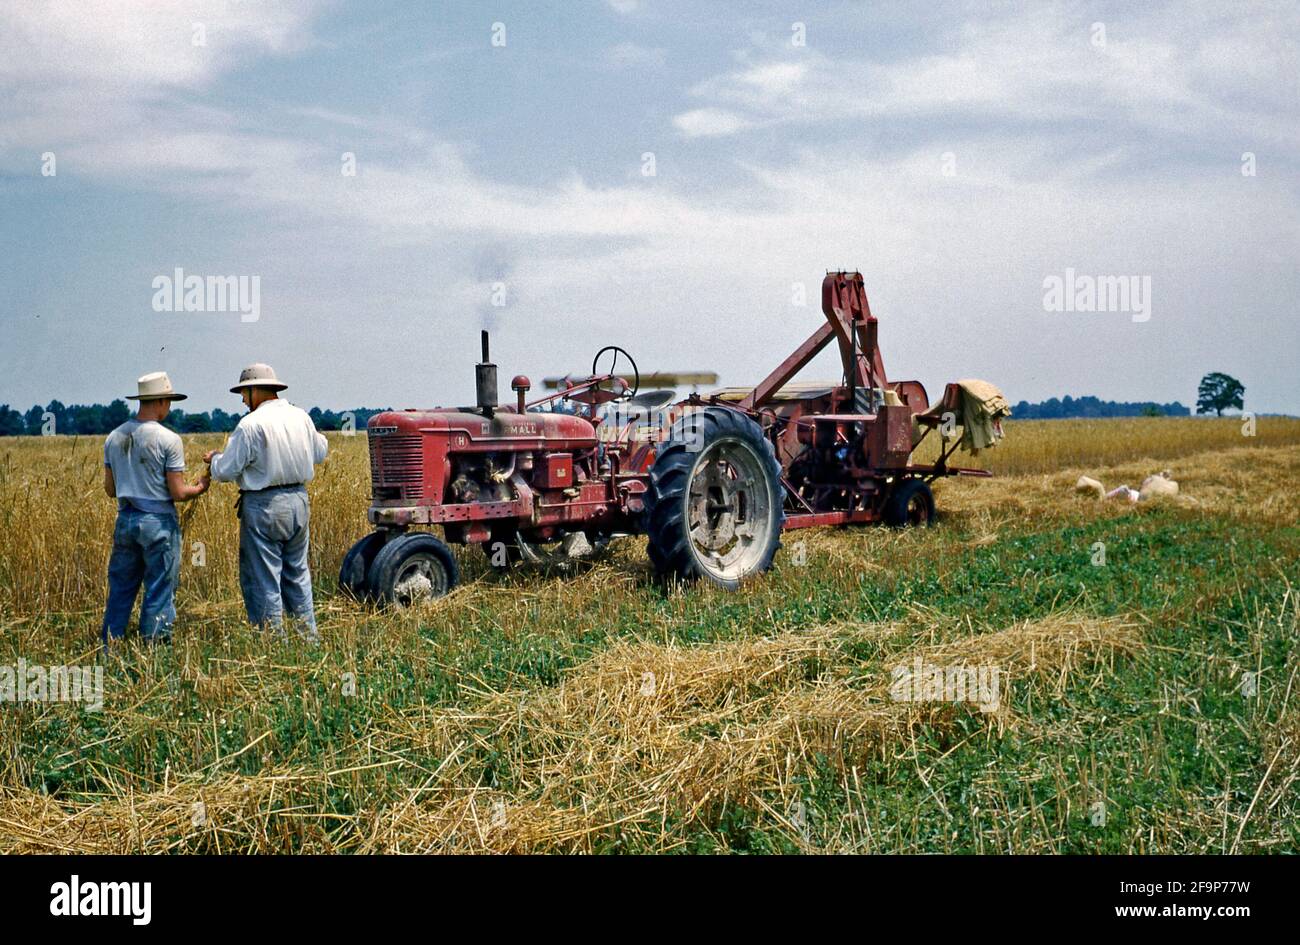 Two farm workers inspect a sample of their wheat crop in a field on a farm in the USA in the early 1950s. The tractor and the harvesting equipment are stationery while they confer. Sacks of grain lie behind the equipment. This image is from an old American amateur Kodak colour transparency – a vintage 1950s photograph. Stock Photo